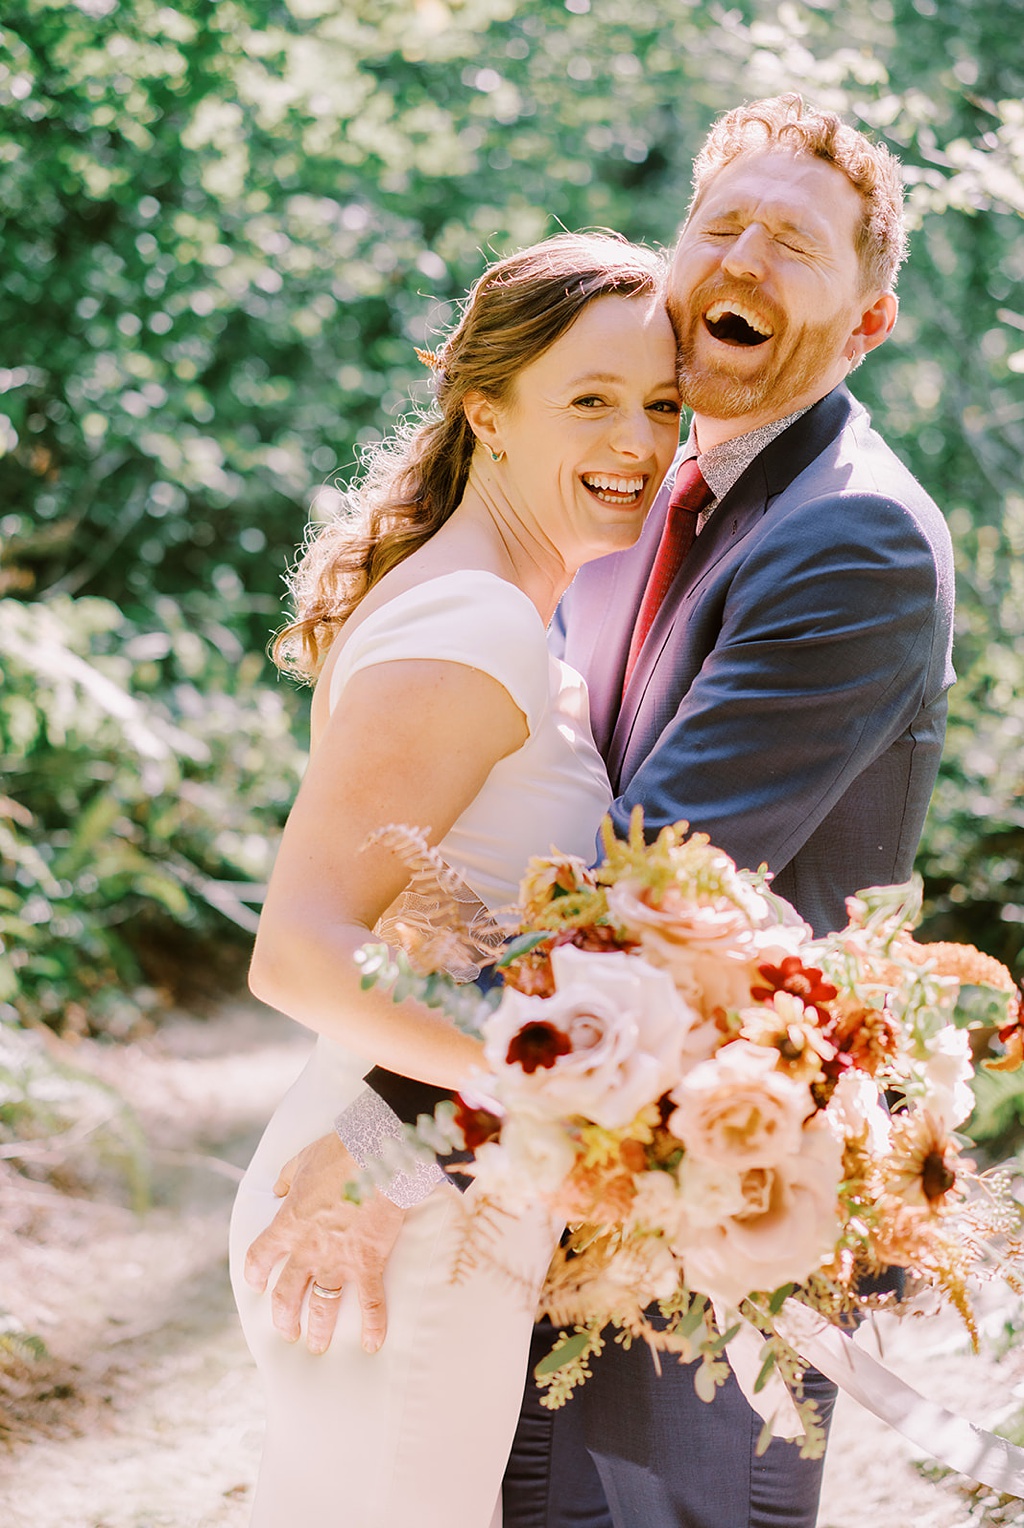 The couple laughing and holding a summer wedding flower bouquet